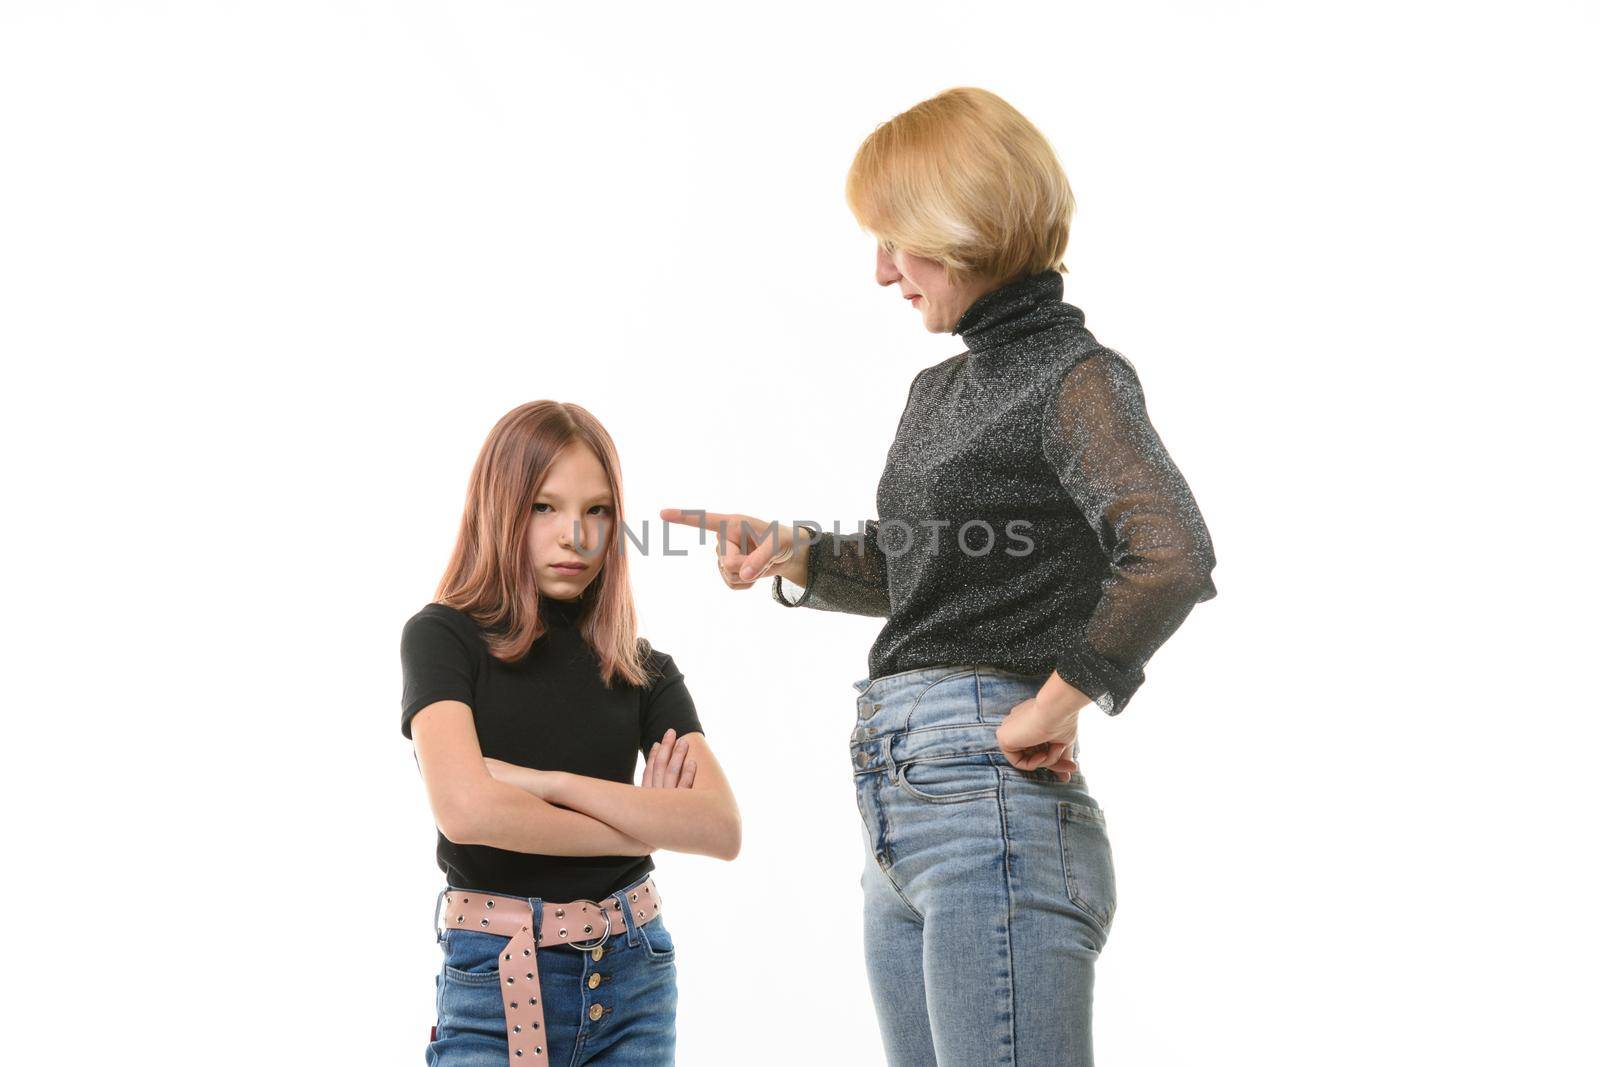 Woman scolding her daughter, upset daughter looks into the frame, close-up portrait a